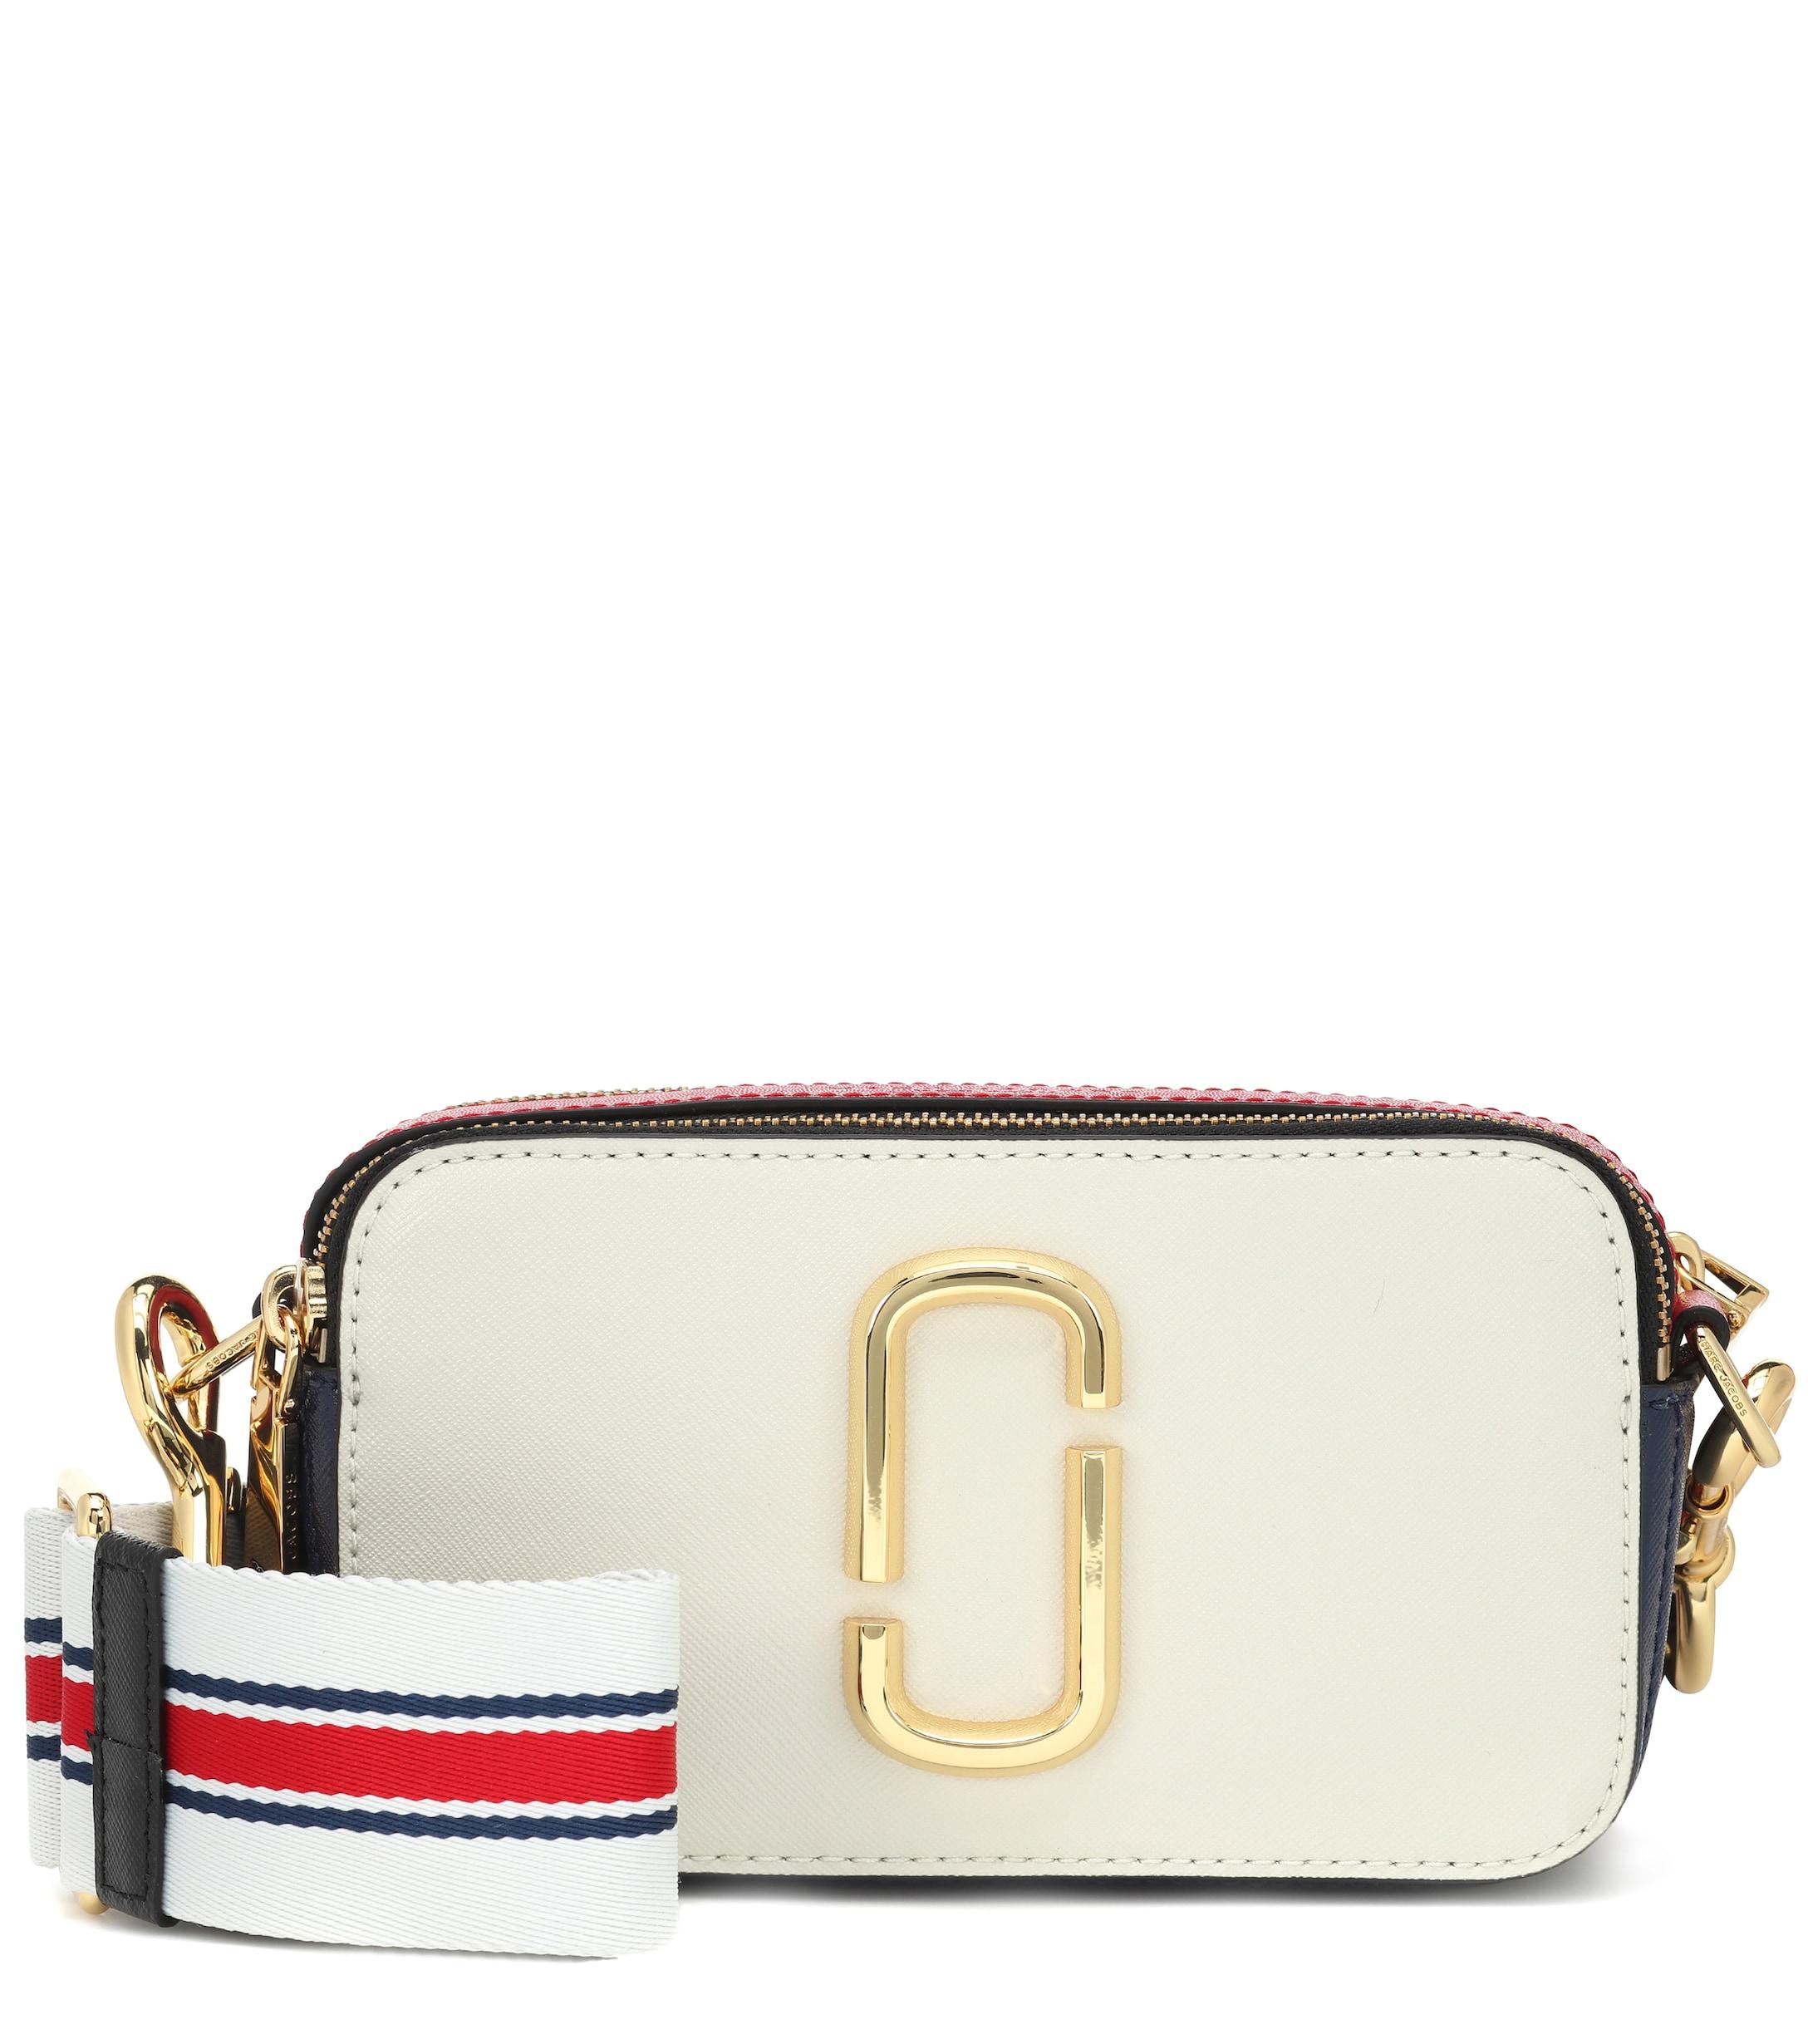 Marc Jacobs Snapshot Small Leather Crossbody Bag in Beige (Natural) - Lyst